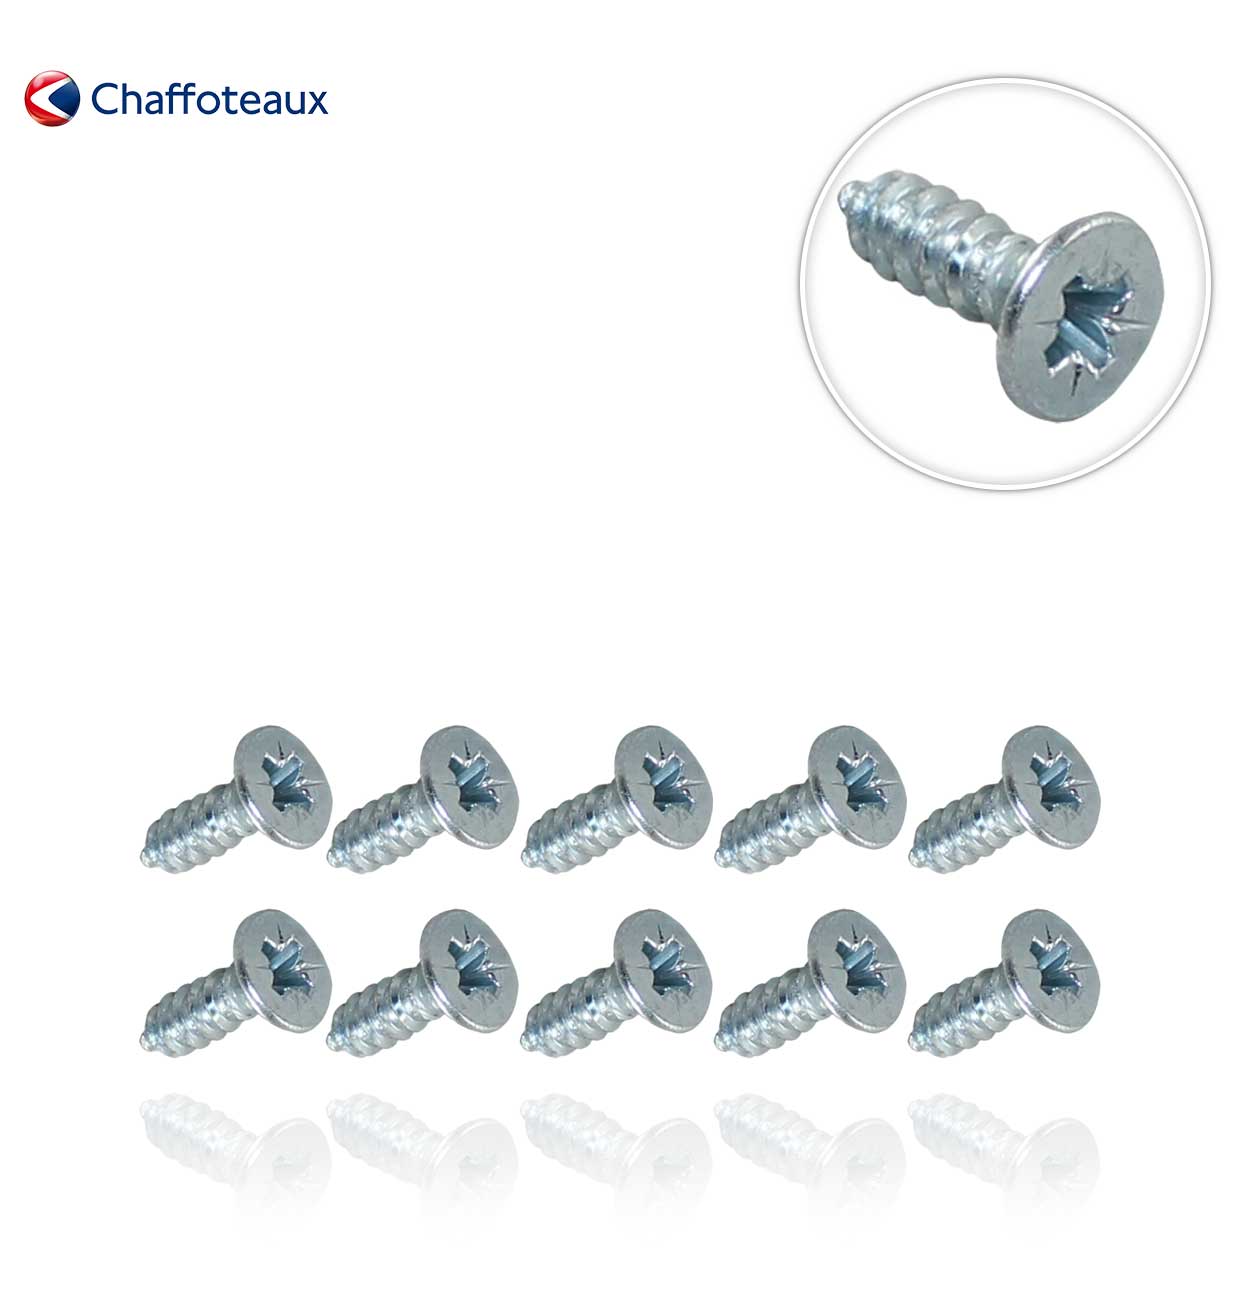 TORNILLO CHAPA D: 4.8-9.5  (10uds.)  CHAFFOTEAUX 61007613